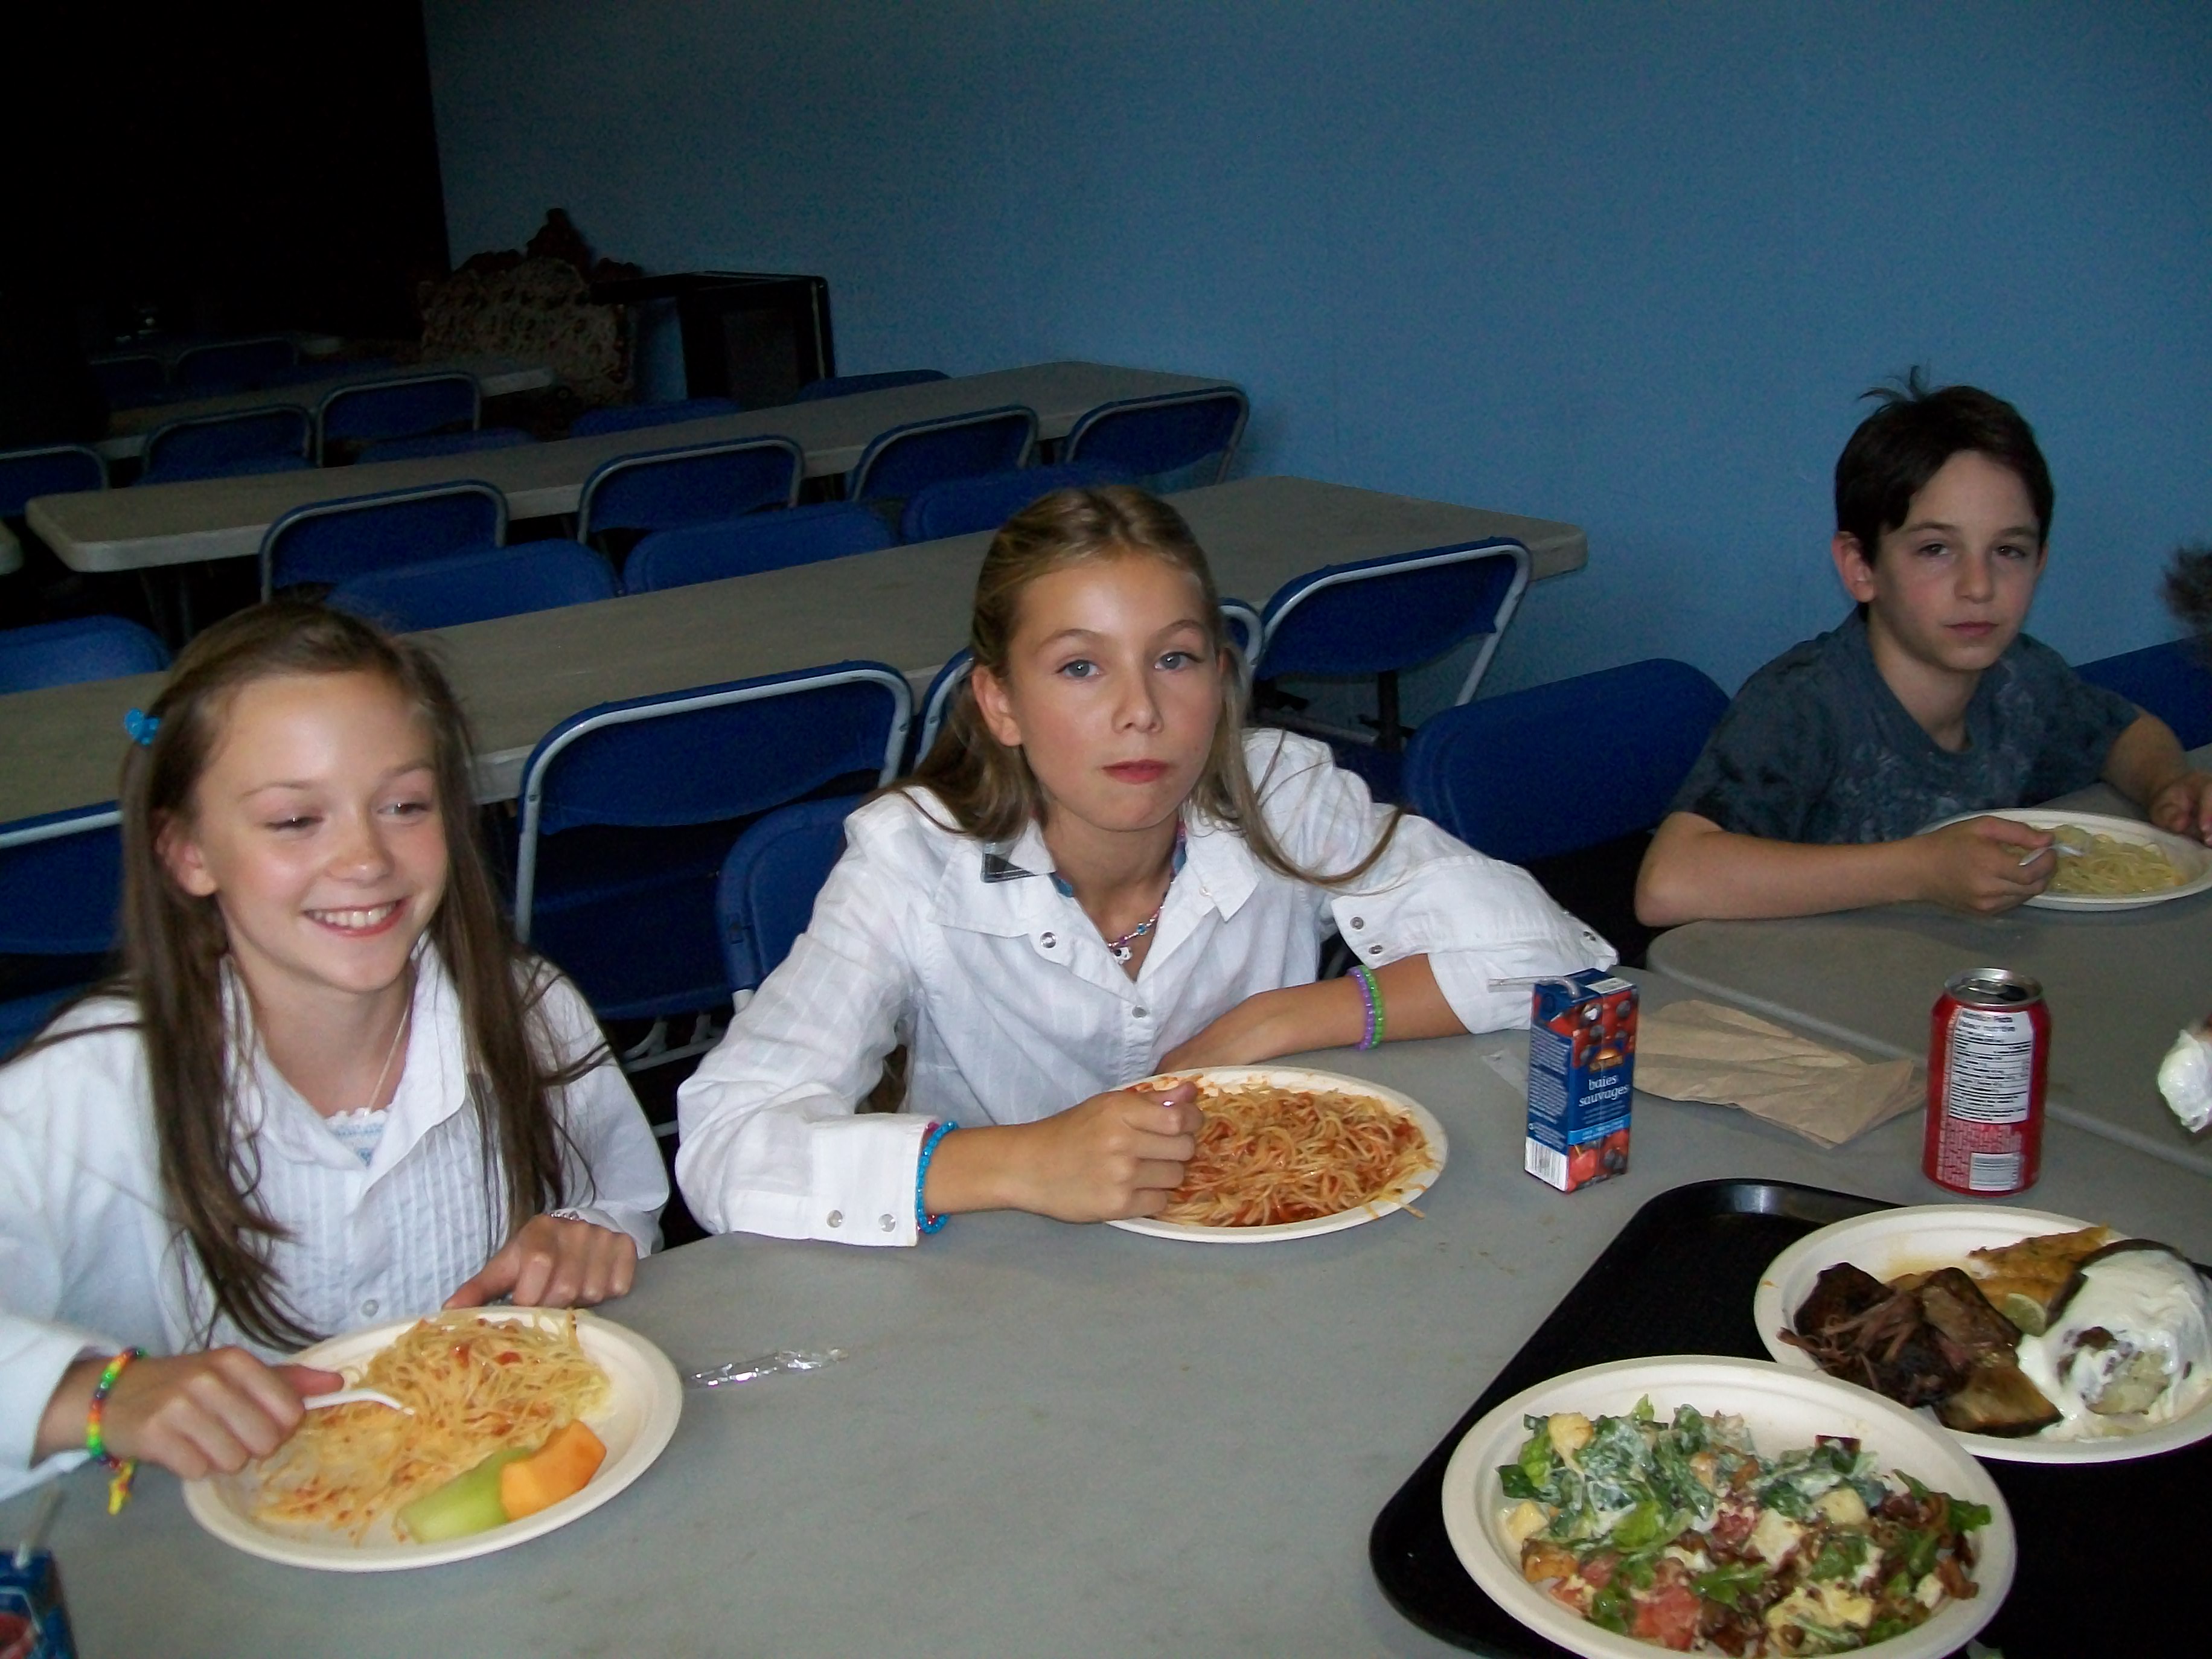 Zachary Gordon who stars as Greg and Samantha Page who stars as Shelley. Both stars in feature film Diary of a Wimpy Kid sharing lunch togeather while taking a break on set.